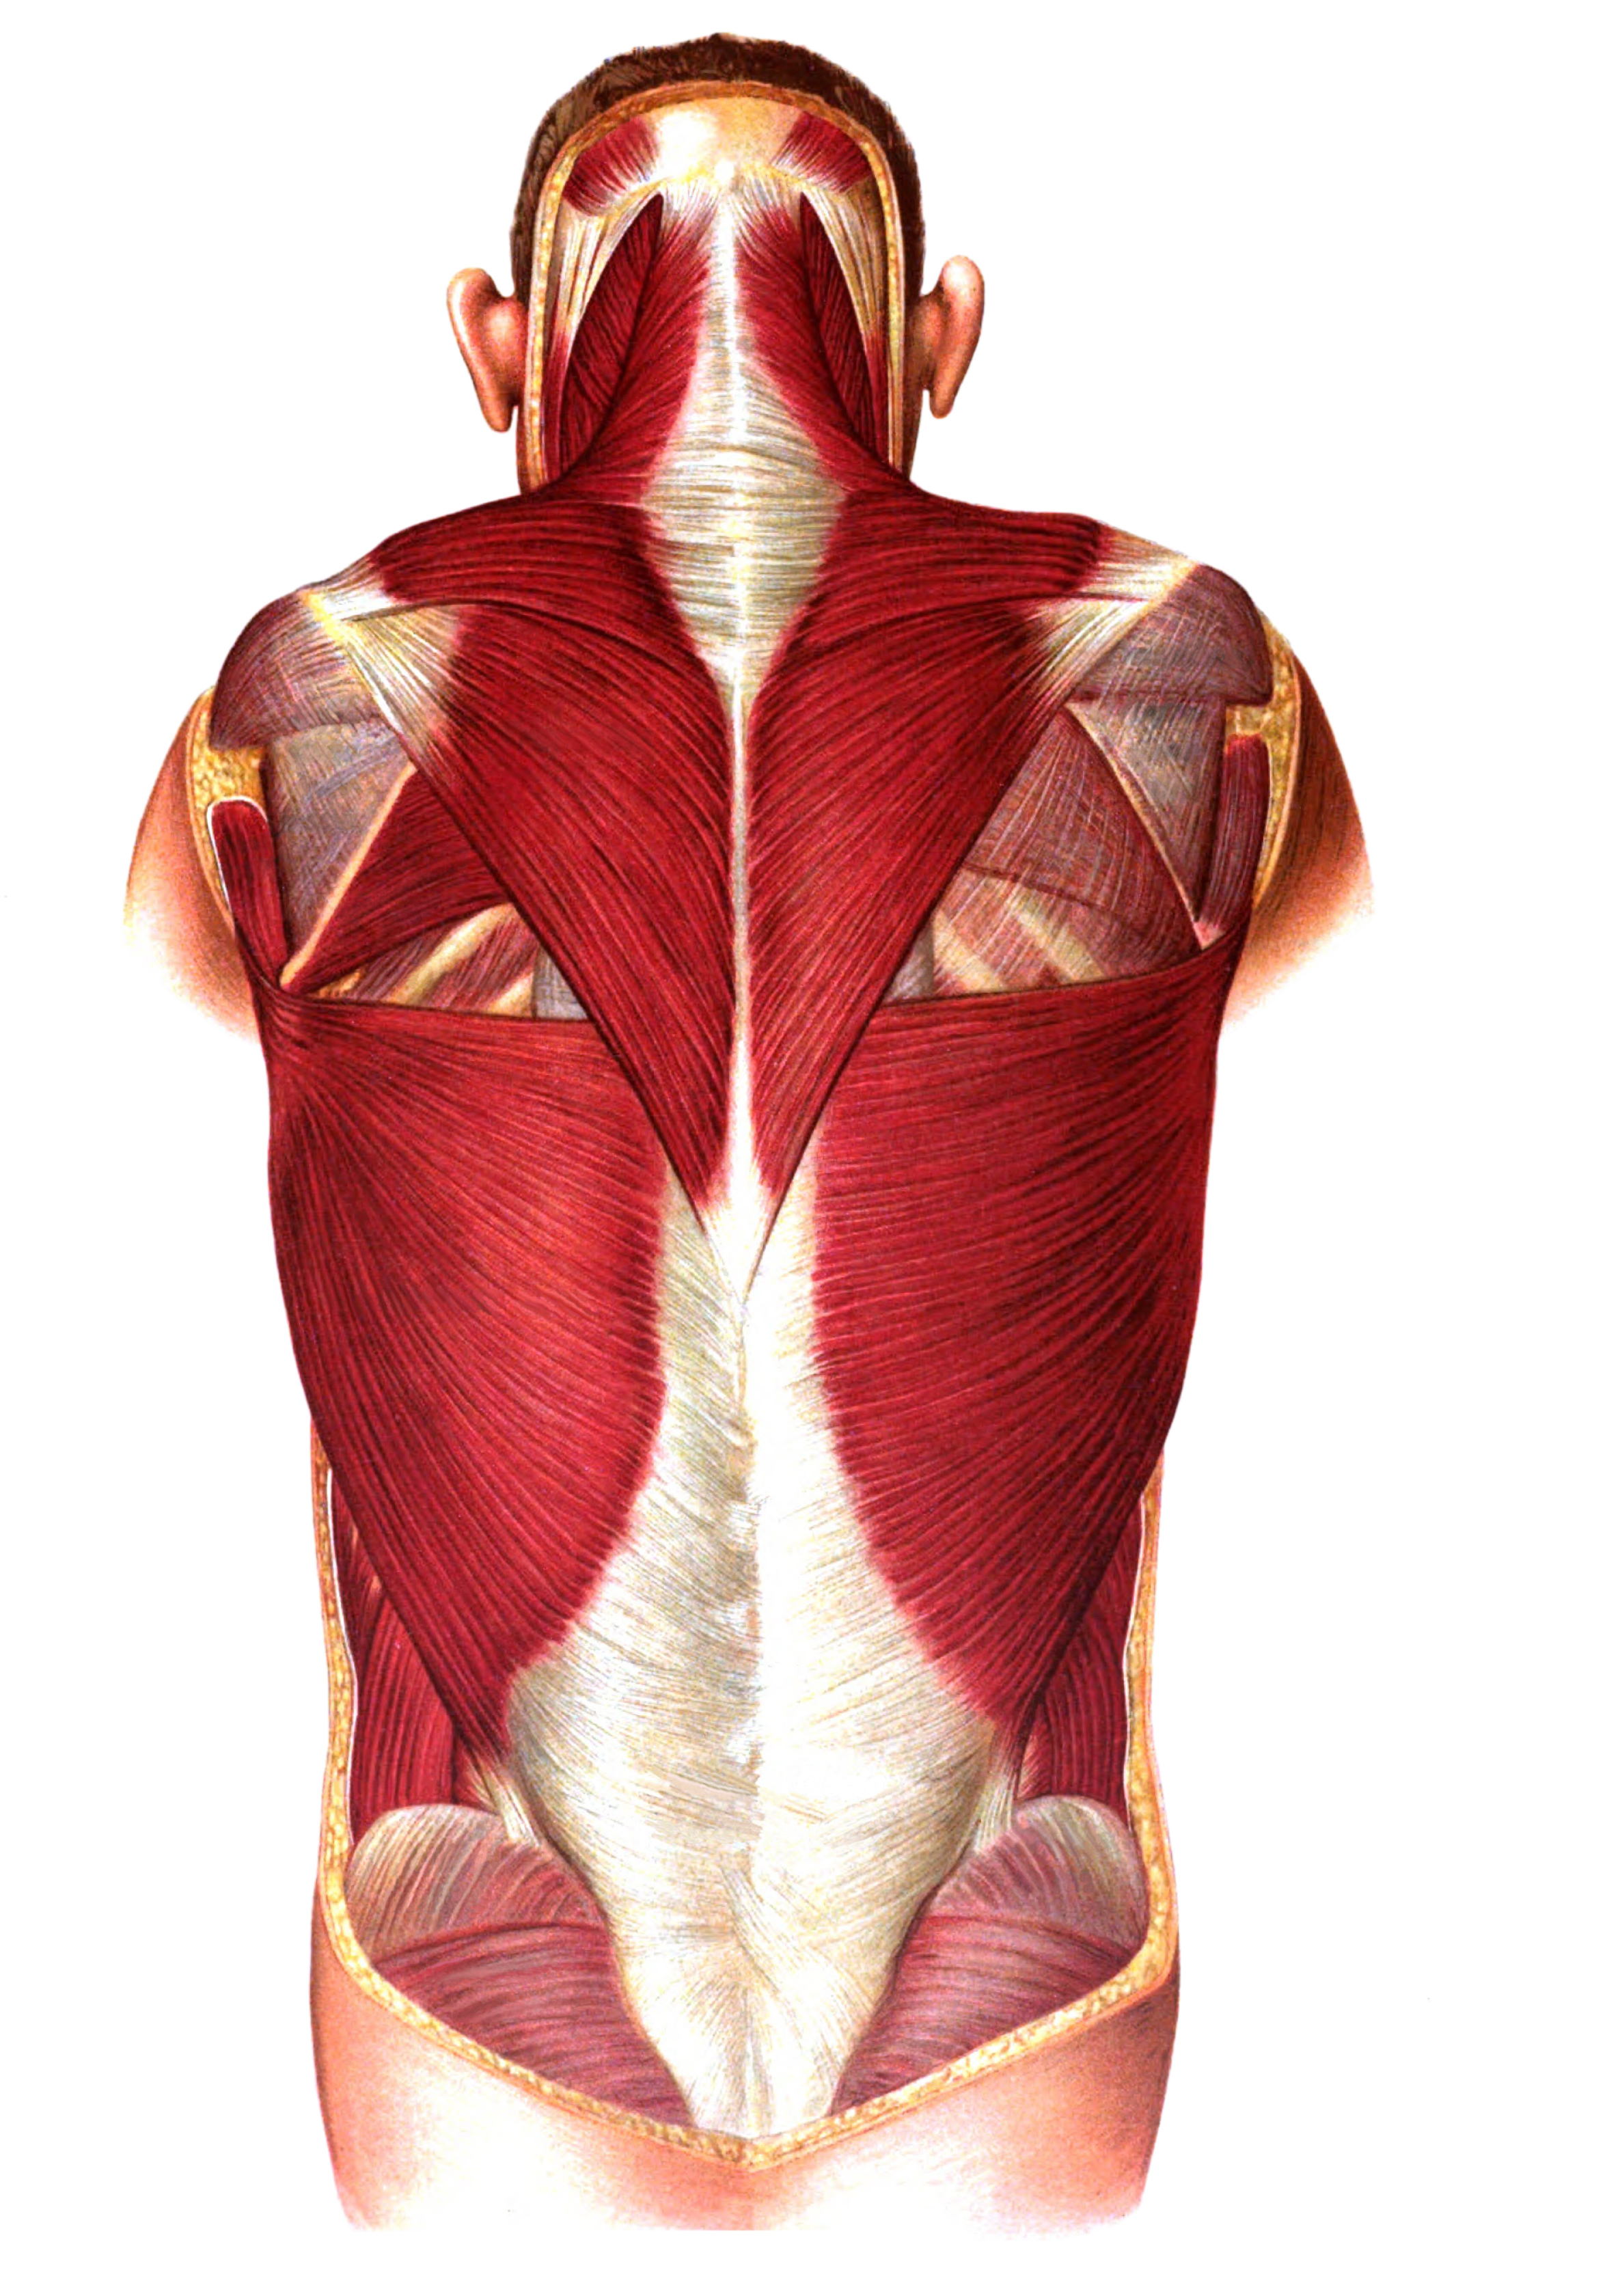 Sobotta 1909 fig.236 - superficial muscles of the back - no labels